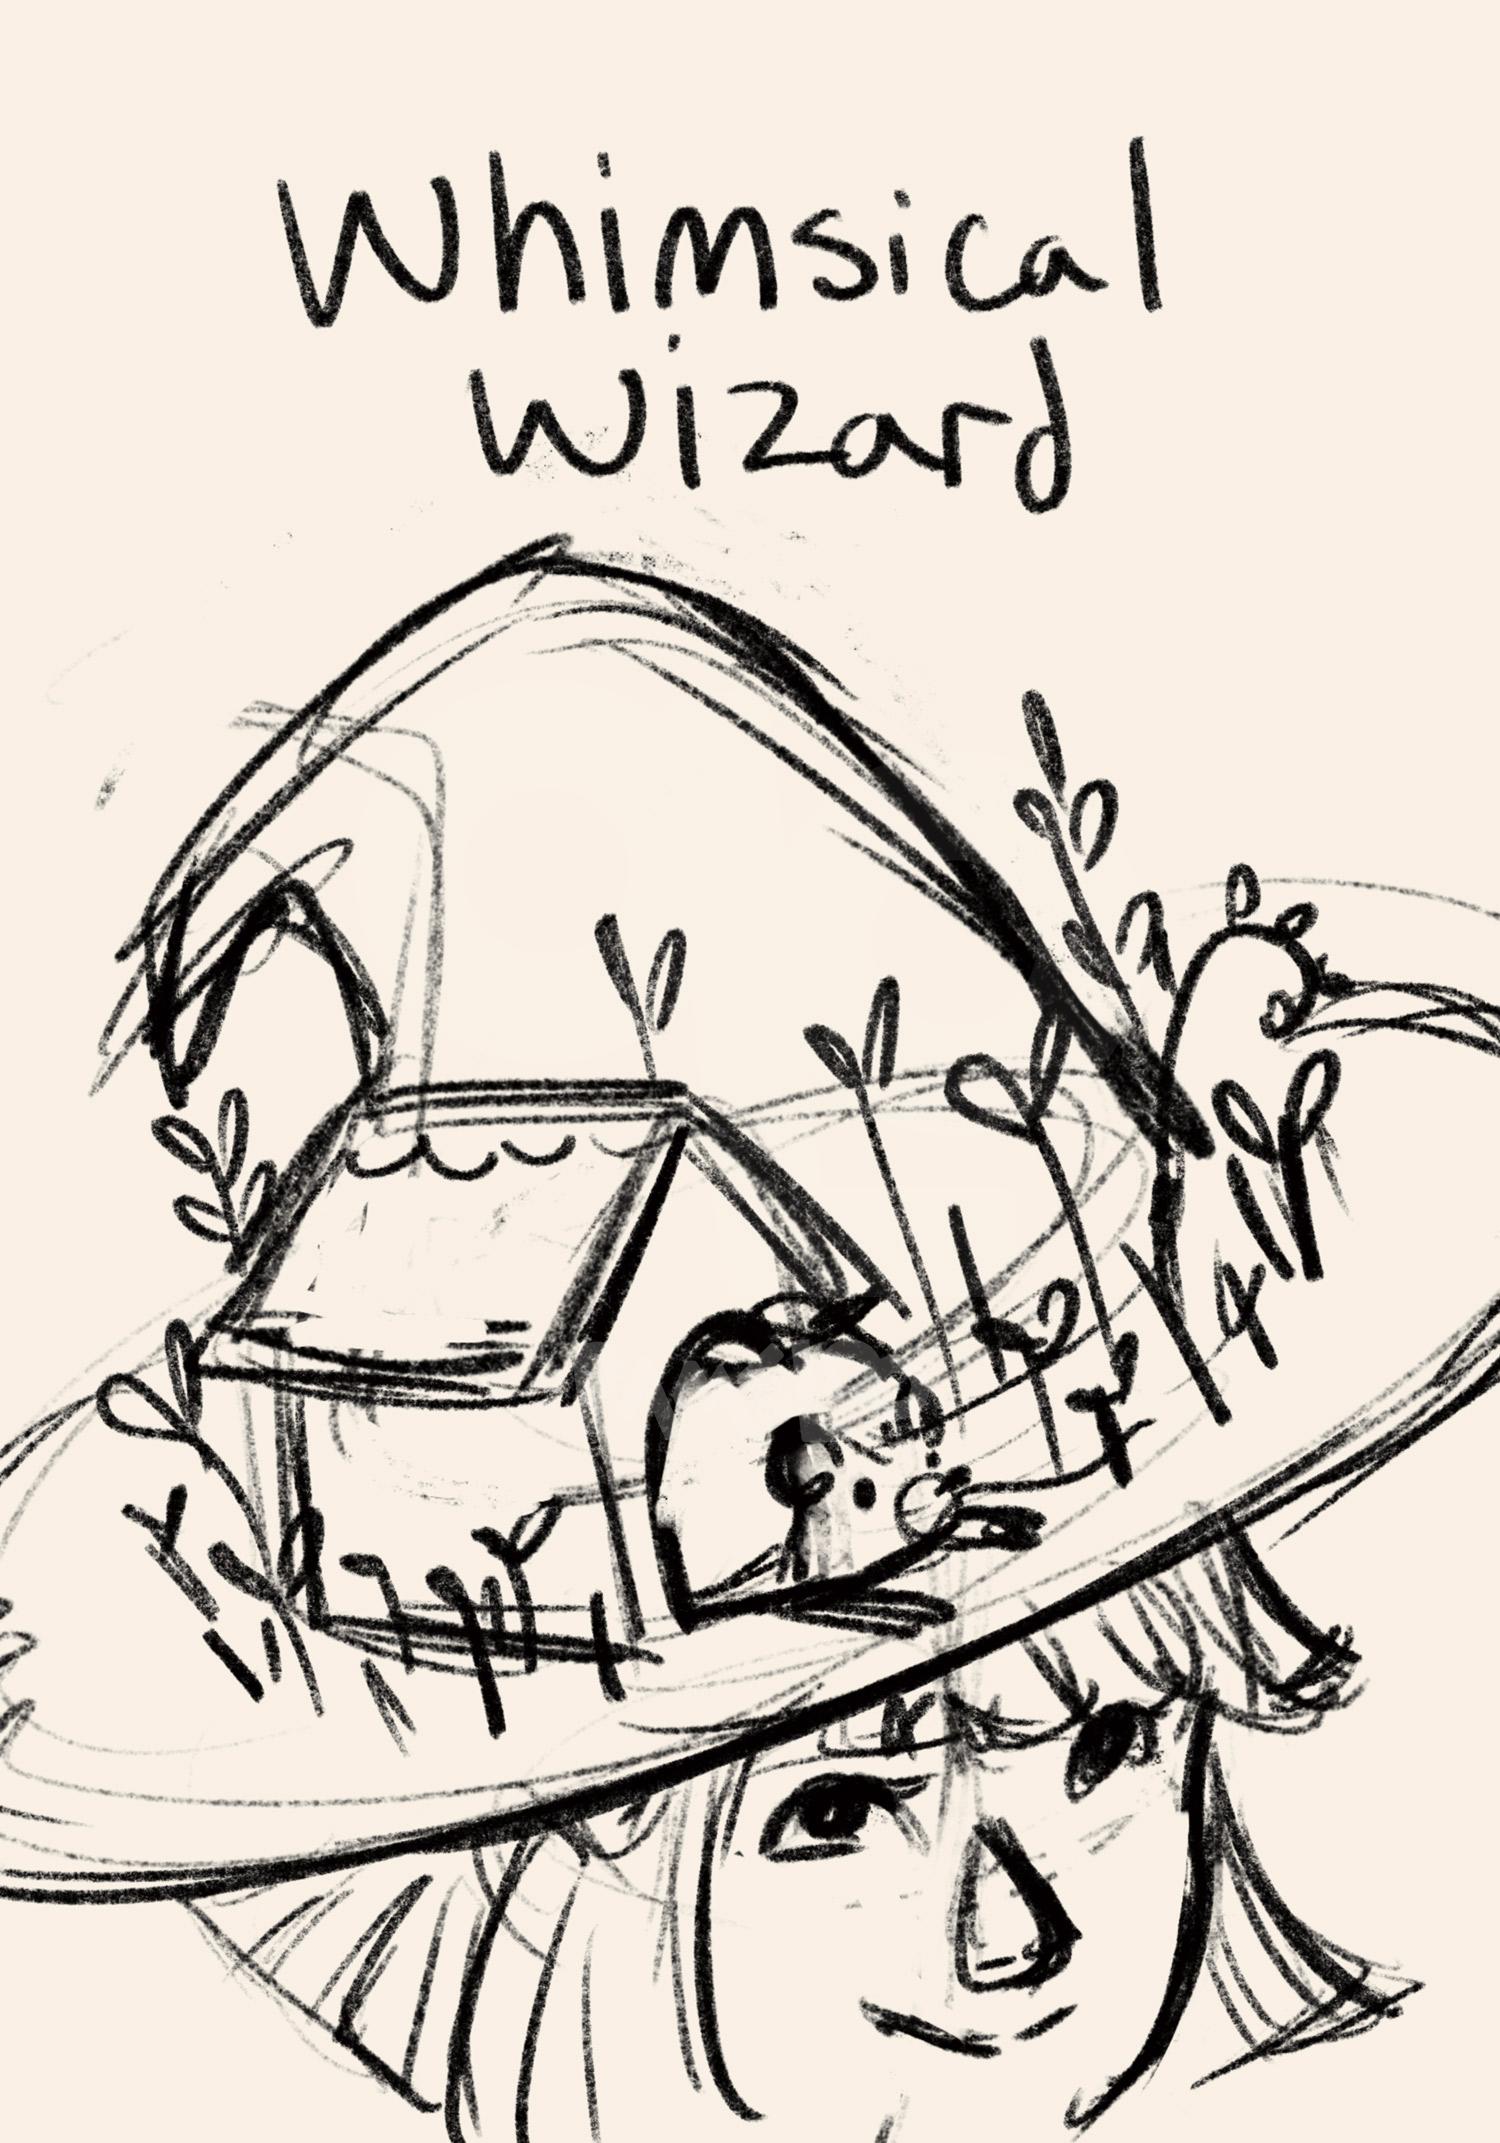 Whimsical Wizardry